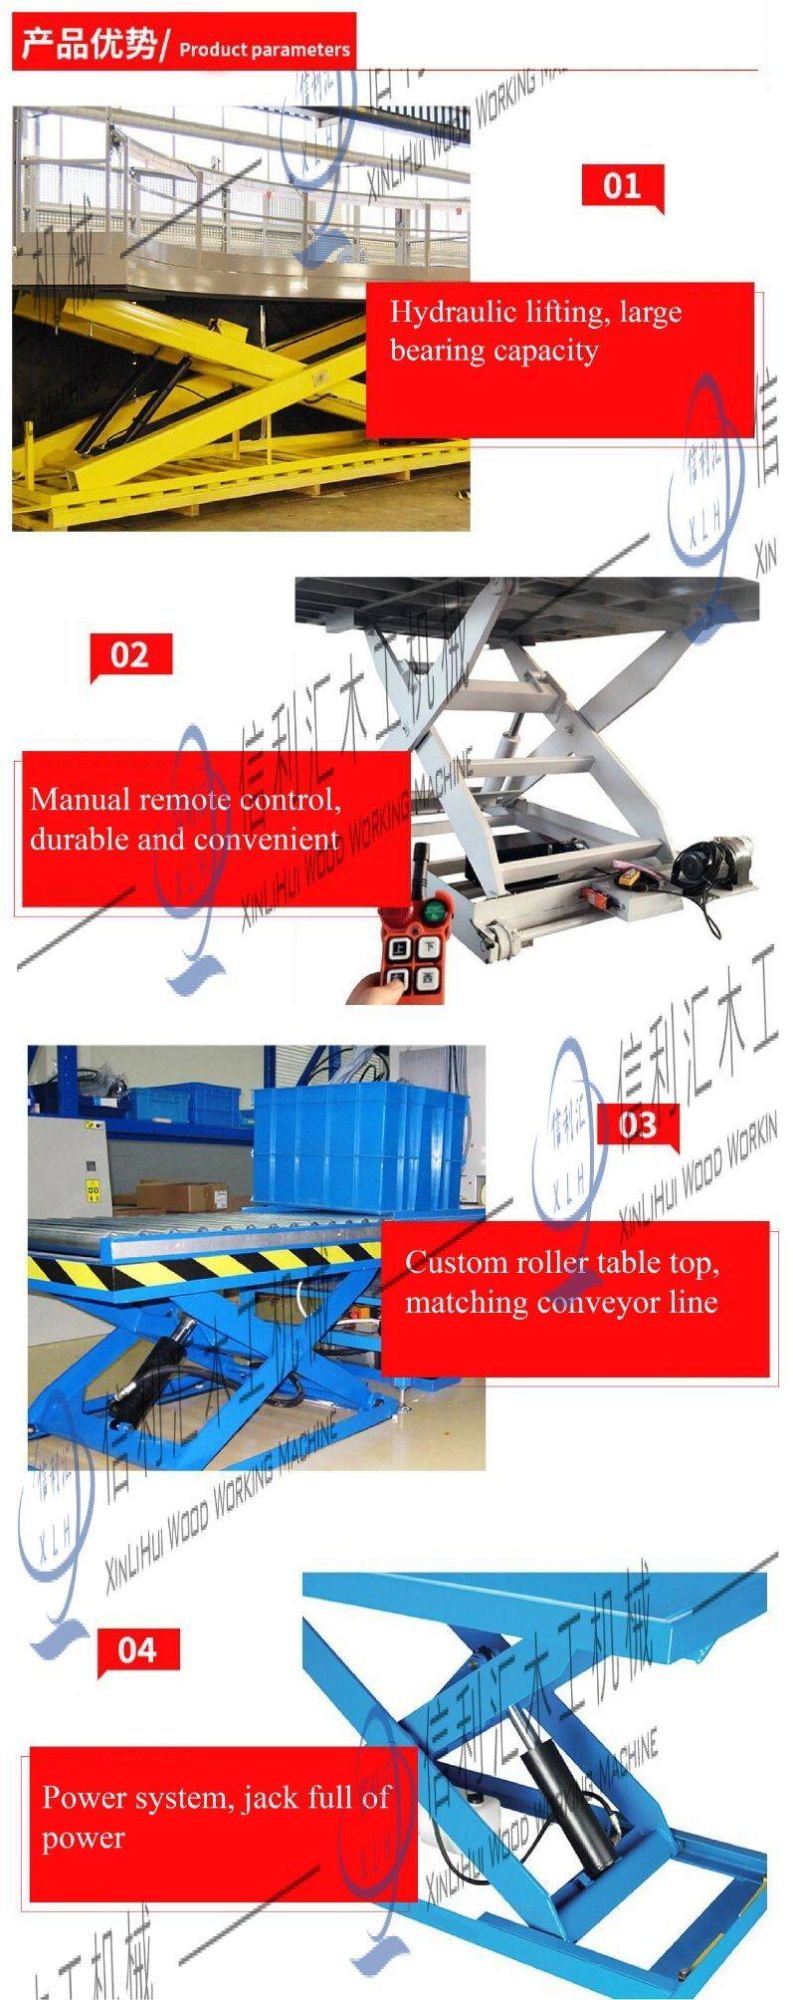 Scissor Lift Table/Stationary Hydraulic Lift for Warehouse Widely Used in High Operation Car-Carrying Hydraulic Lifting Table, Work Platform